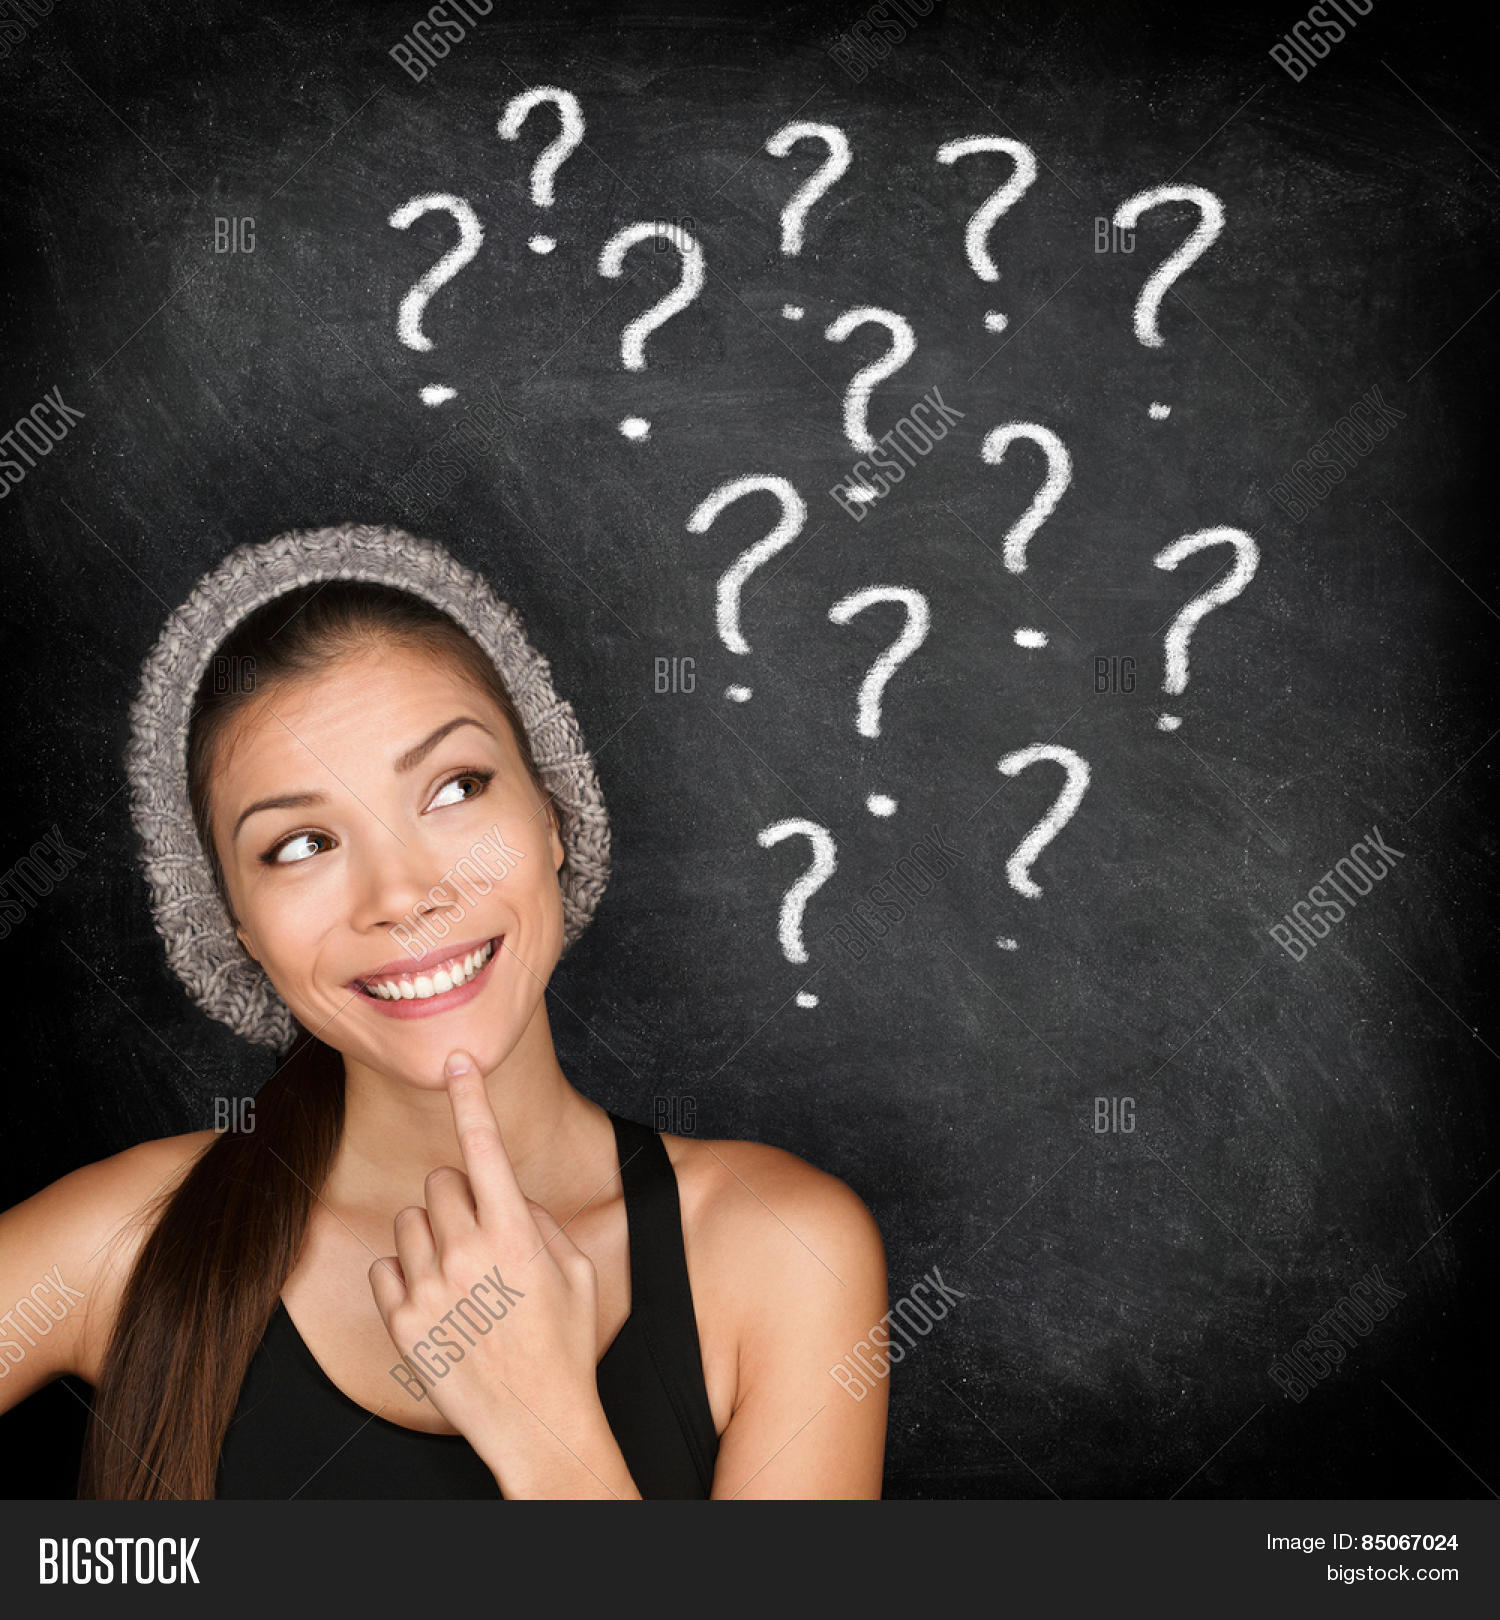 Student Thinking Question Marks On Image & Photo | Bigstock